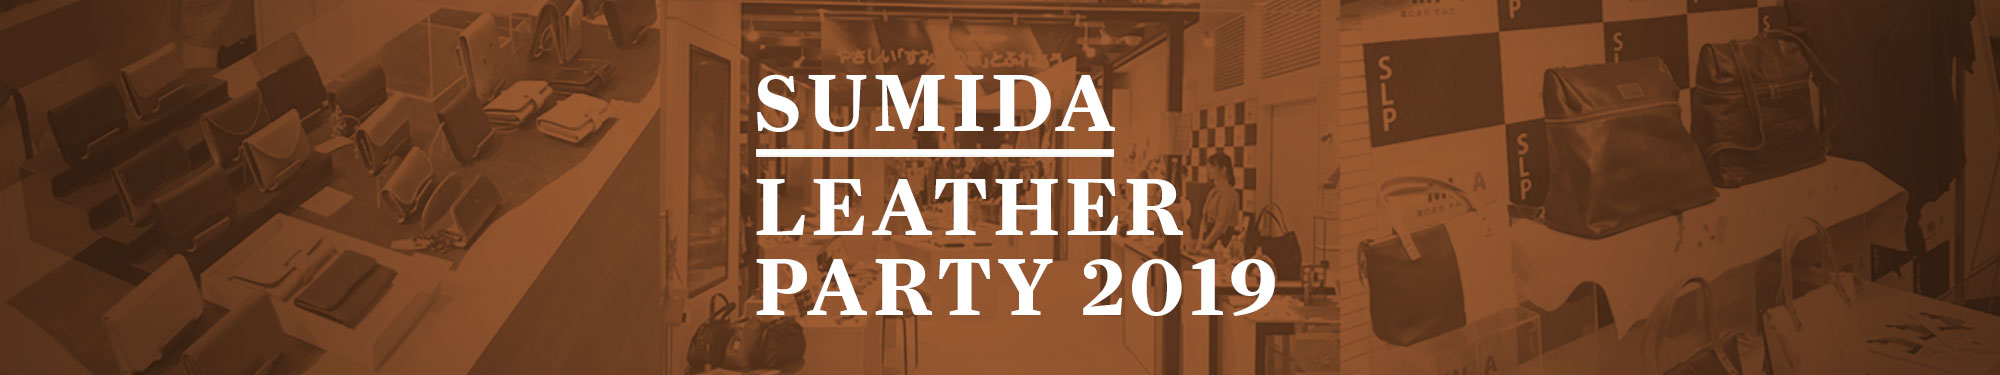 SUMIDA LEATHER PARTY 2019